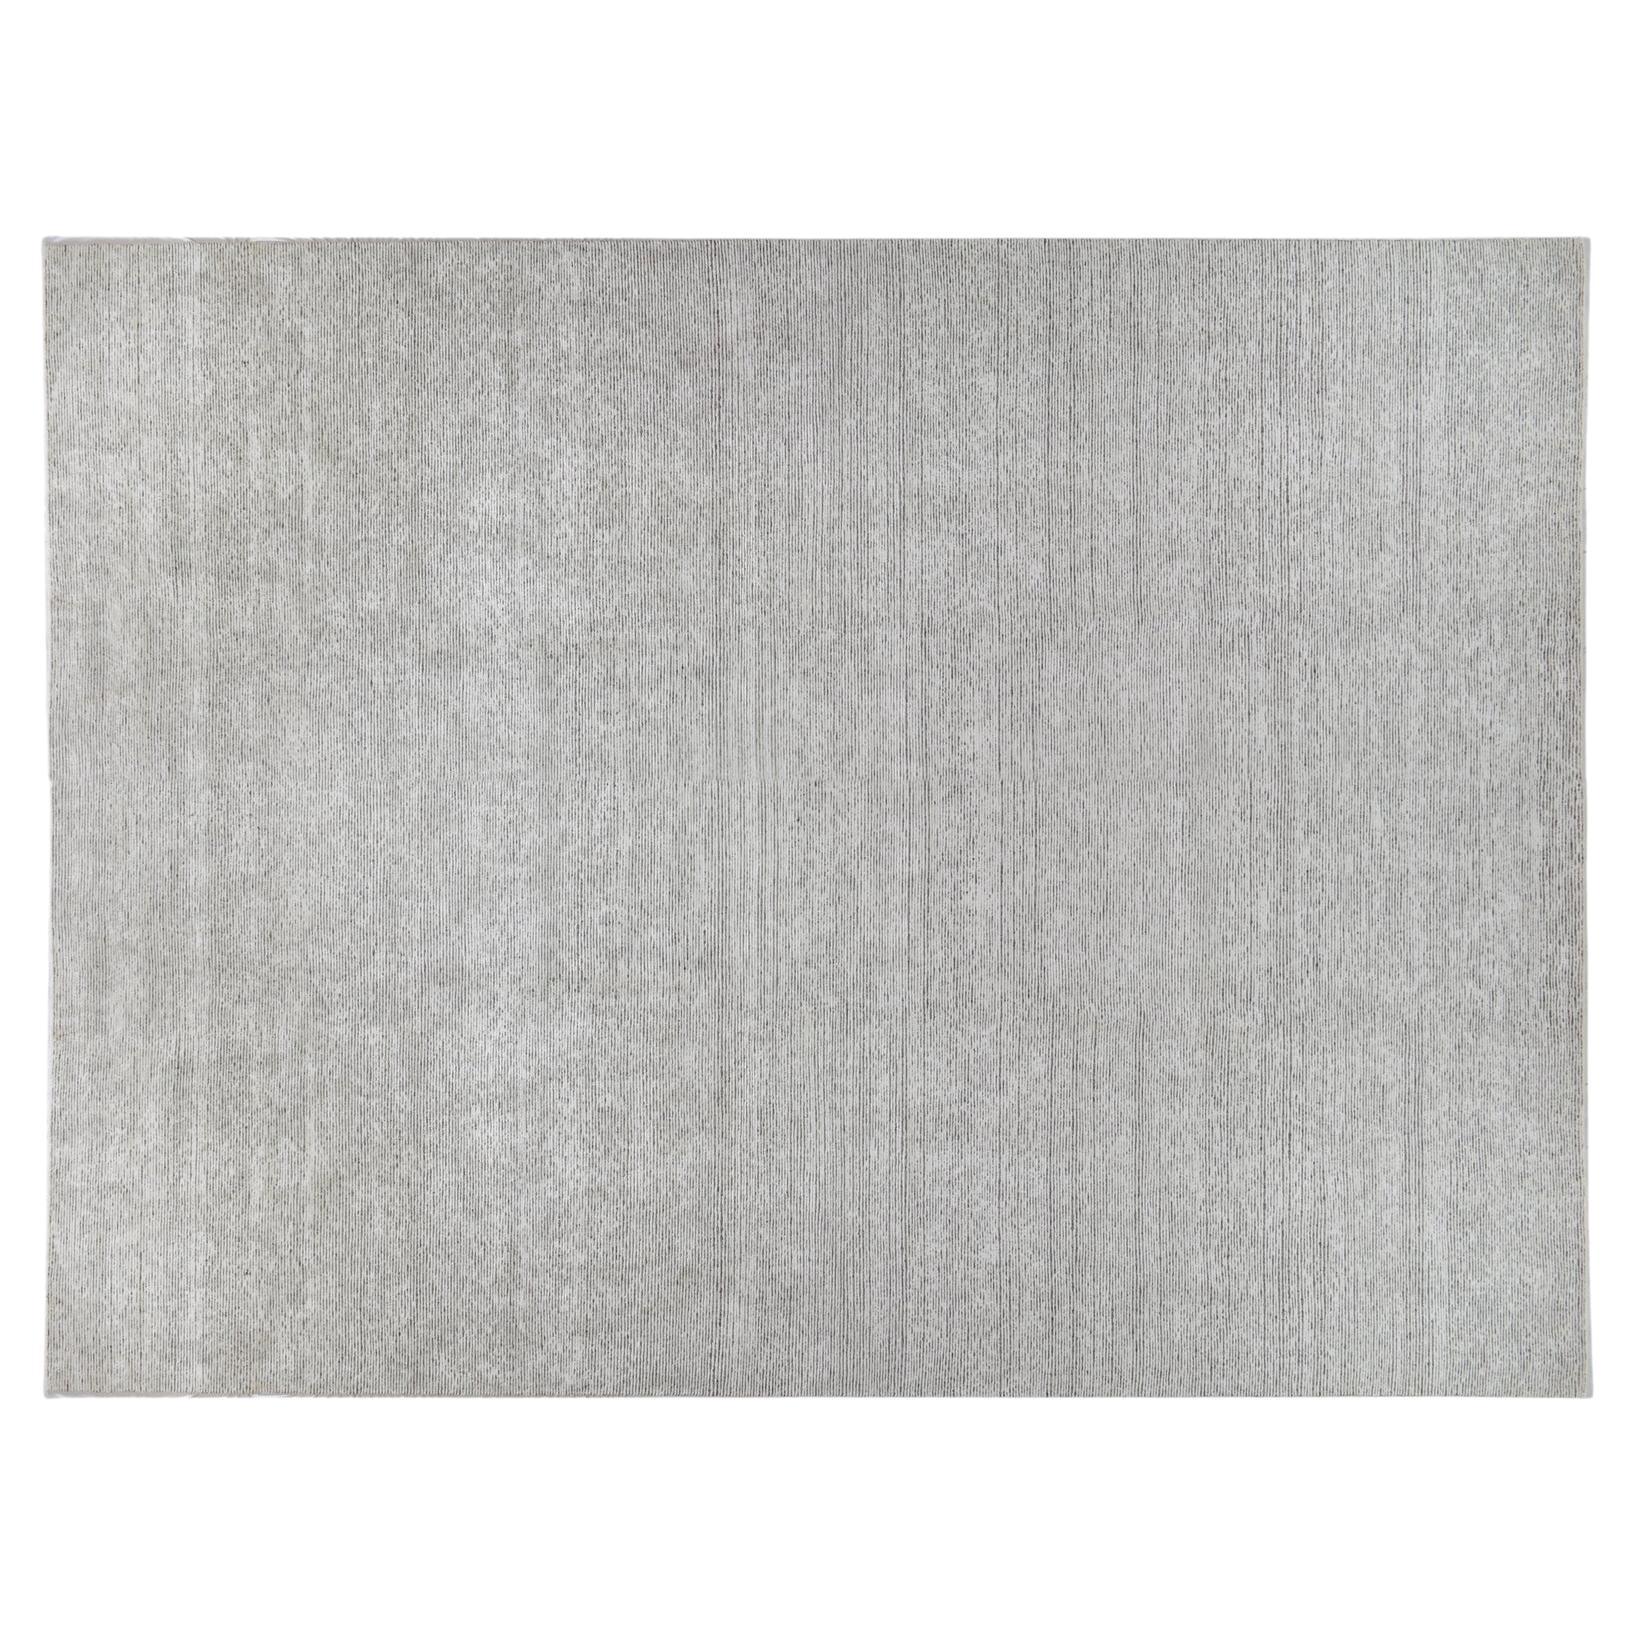 Ivory and Charcoal Stripe Large Area Rug For Sale